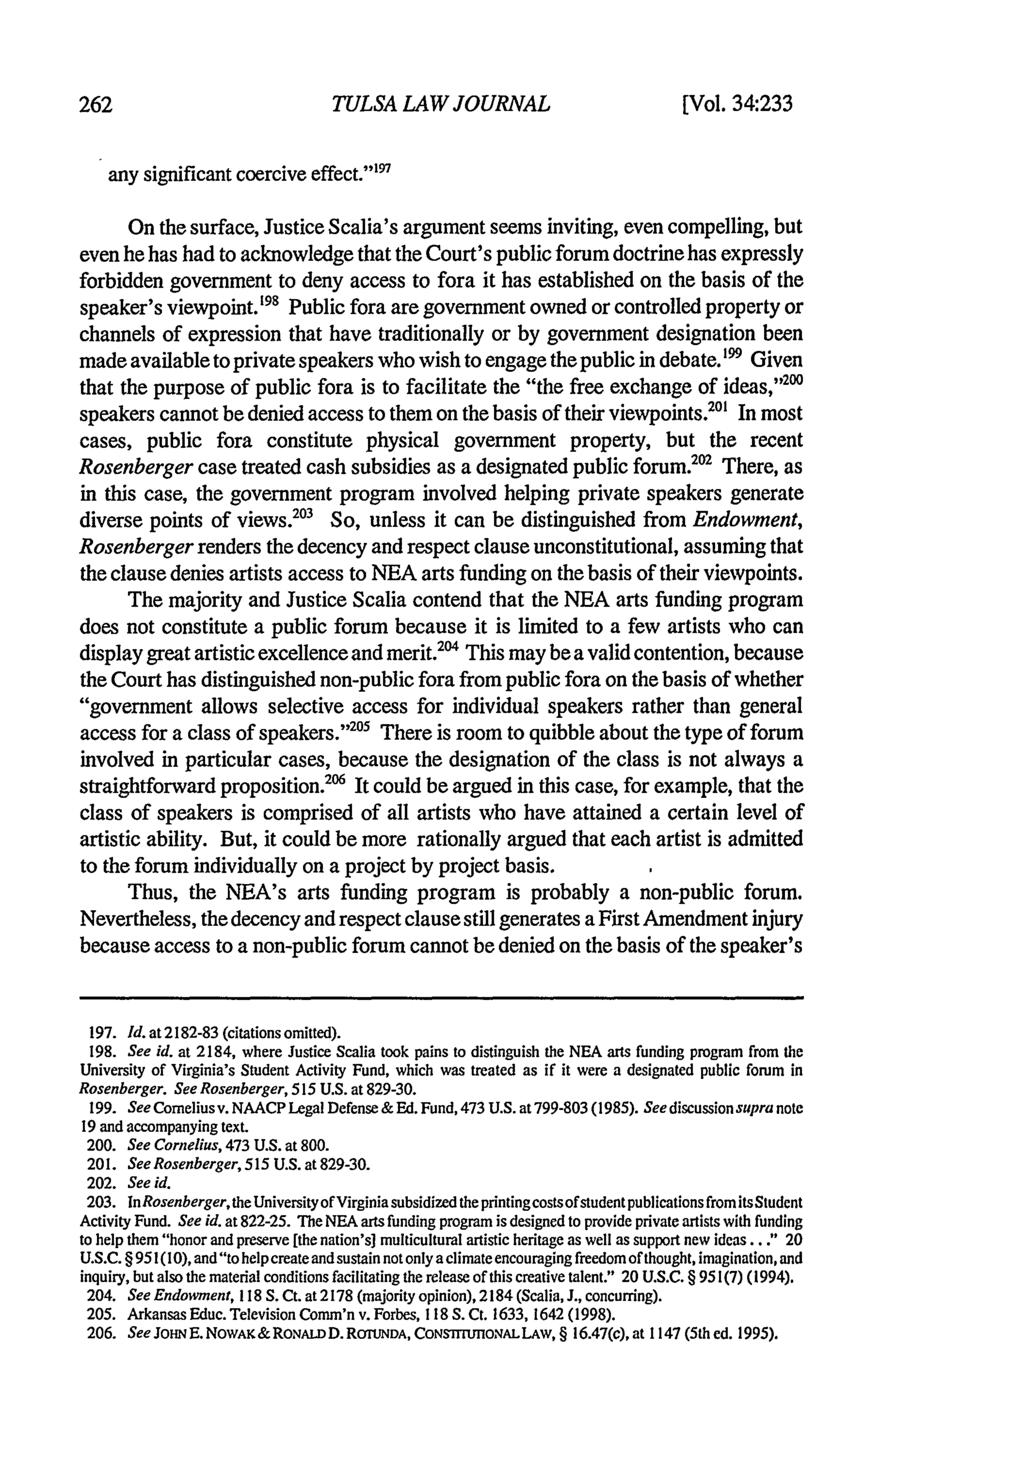 Tulsa Law Review, Vol. 34 [1998], Iss. 2, Art. 3 TULSA LAW JOURNAL [Vol. 34:233 any significant coercive effect.